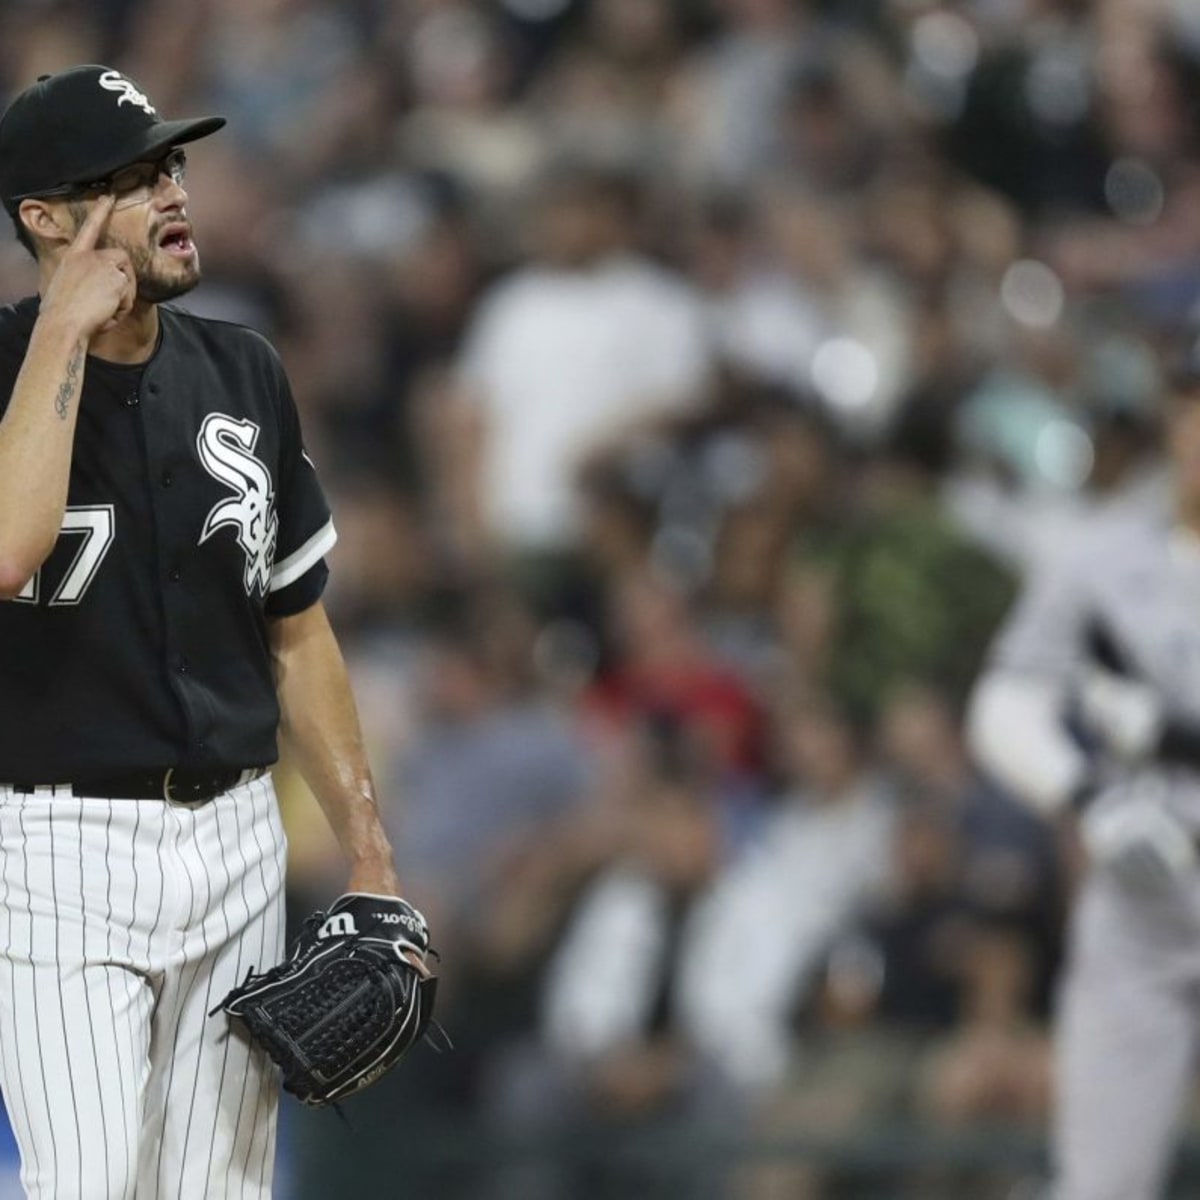 White Sox RHP Kopech on track in comeback from knee injury